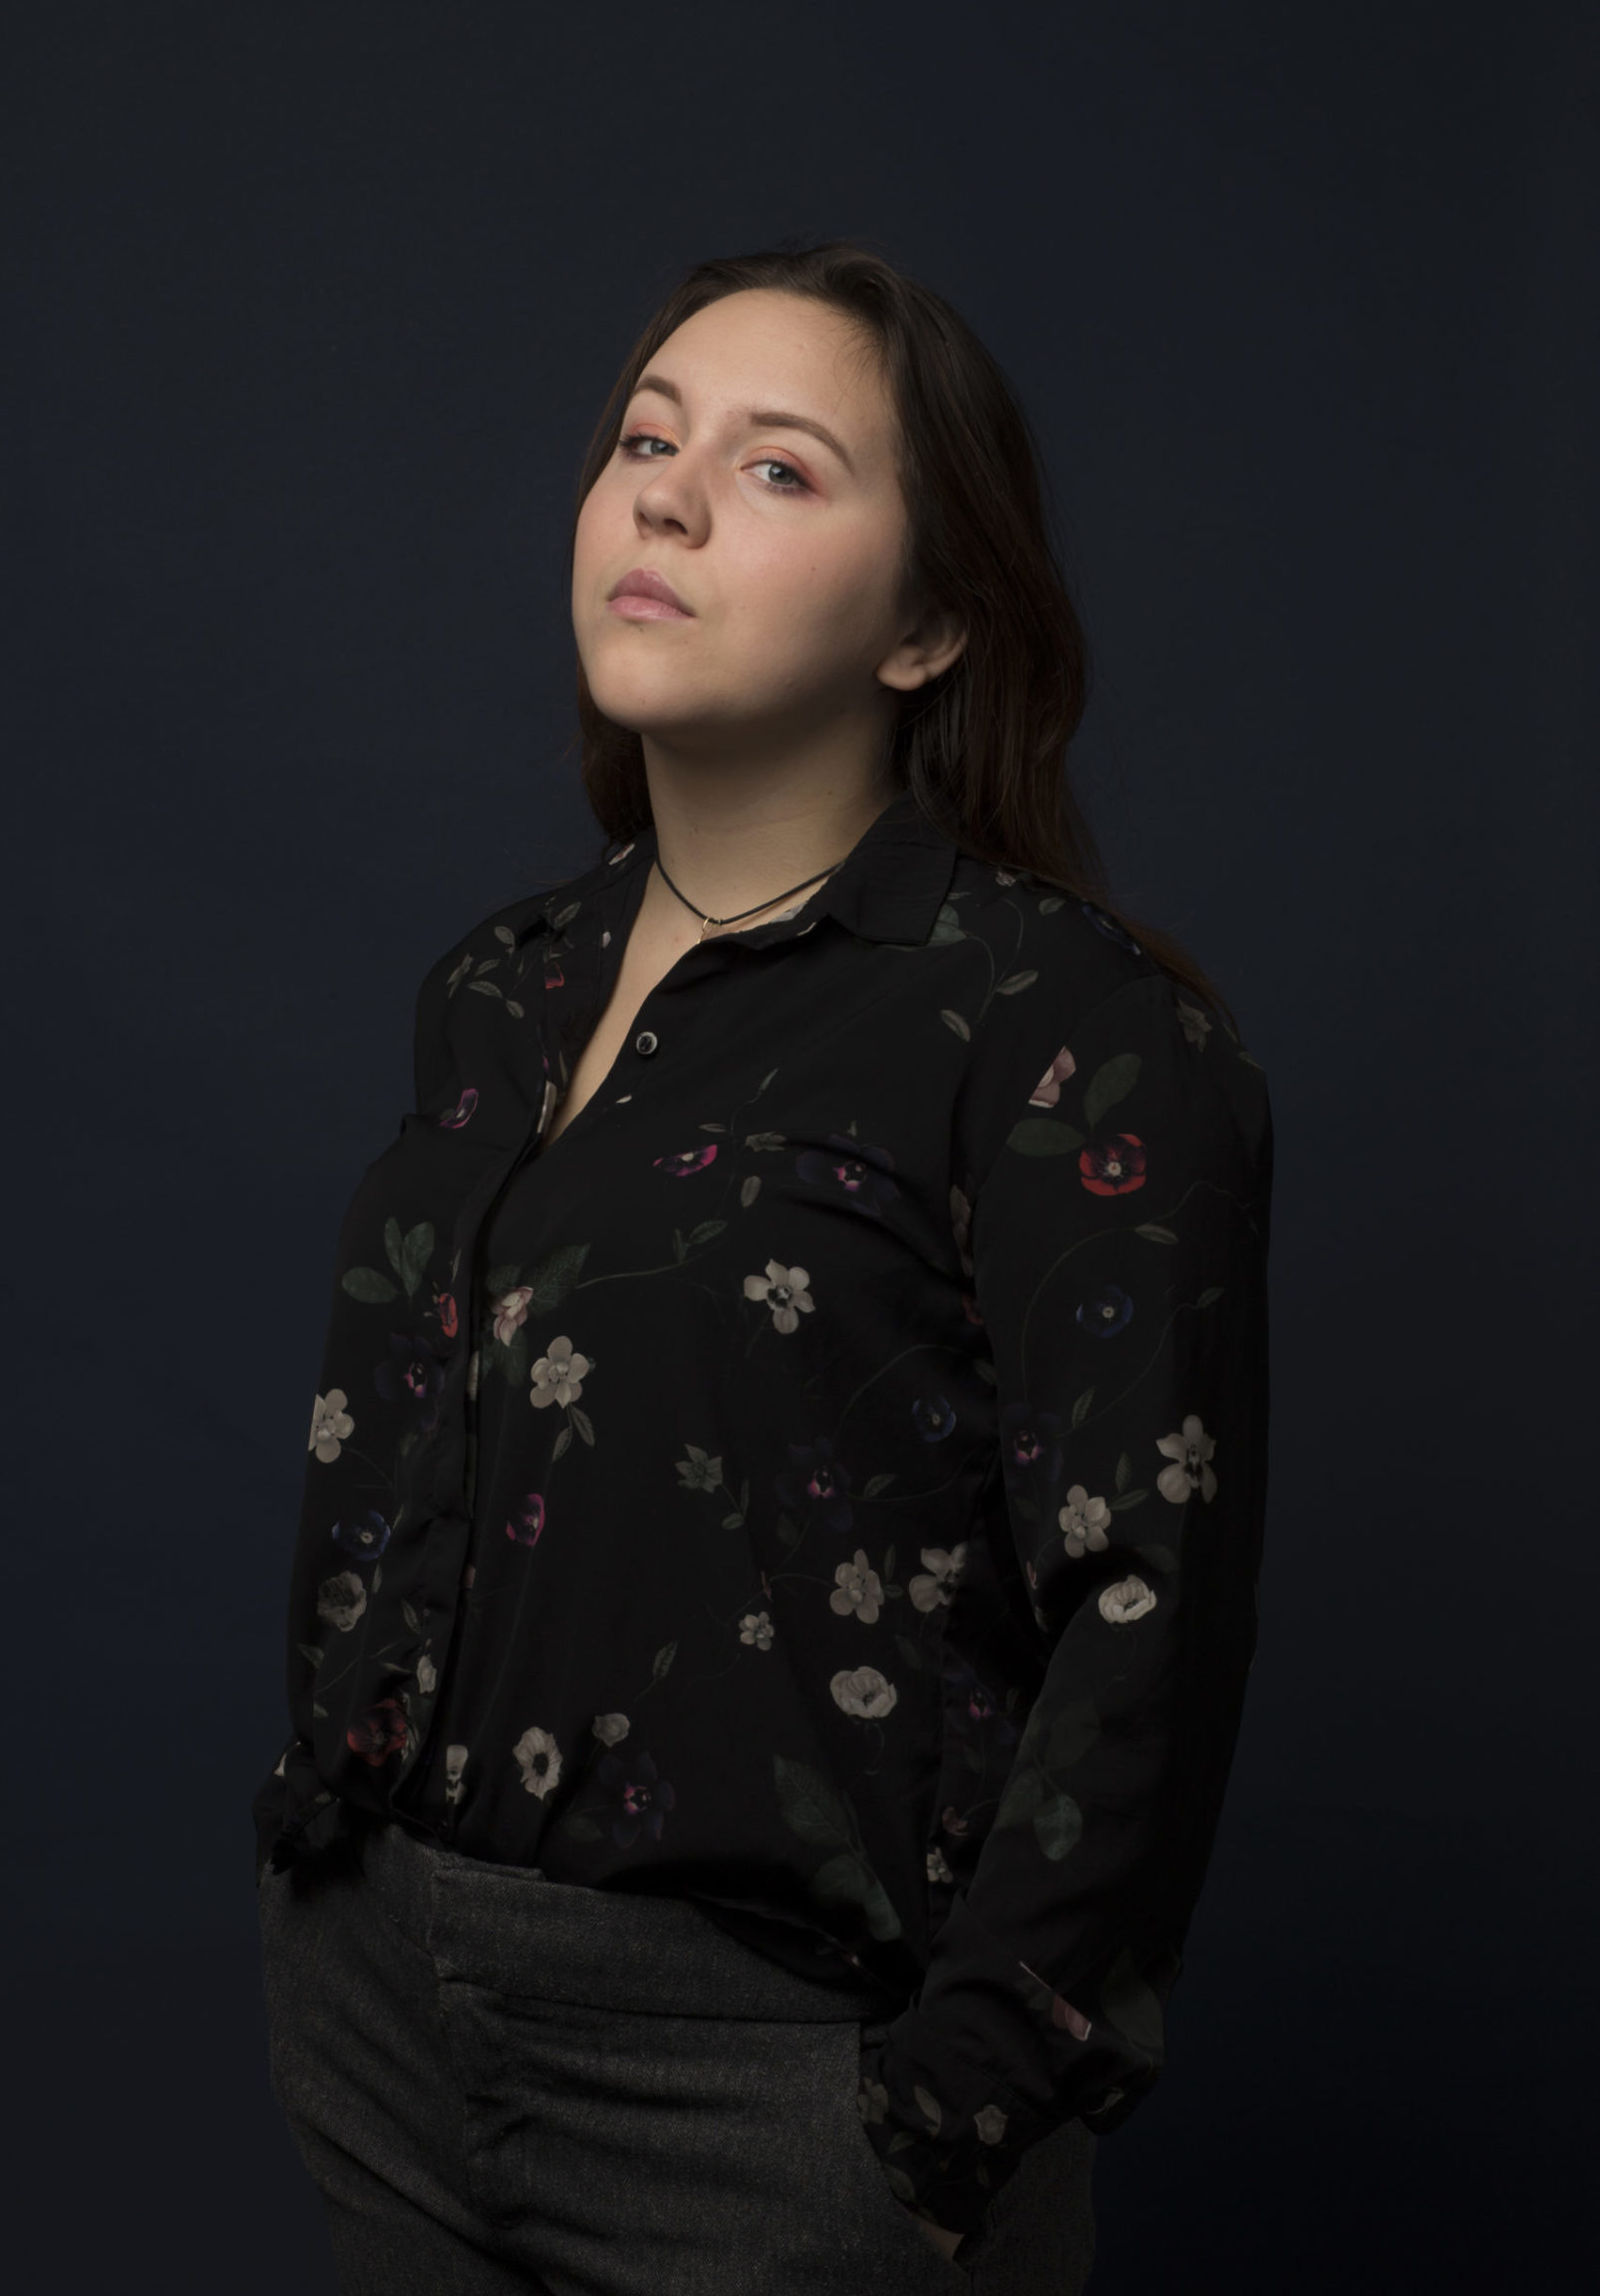 portrait of Constance in a floral shirt against a dark background